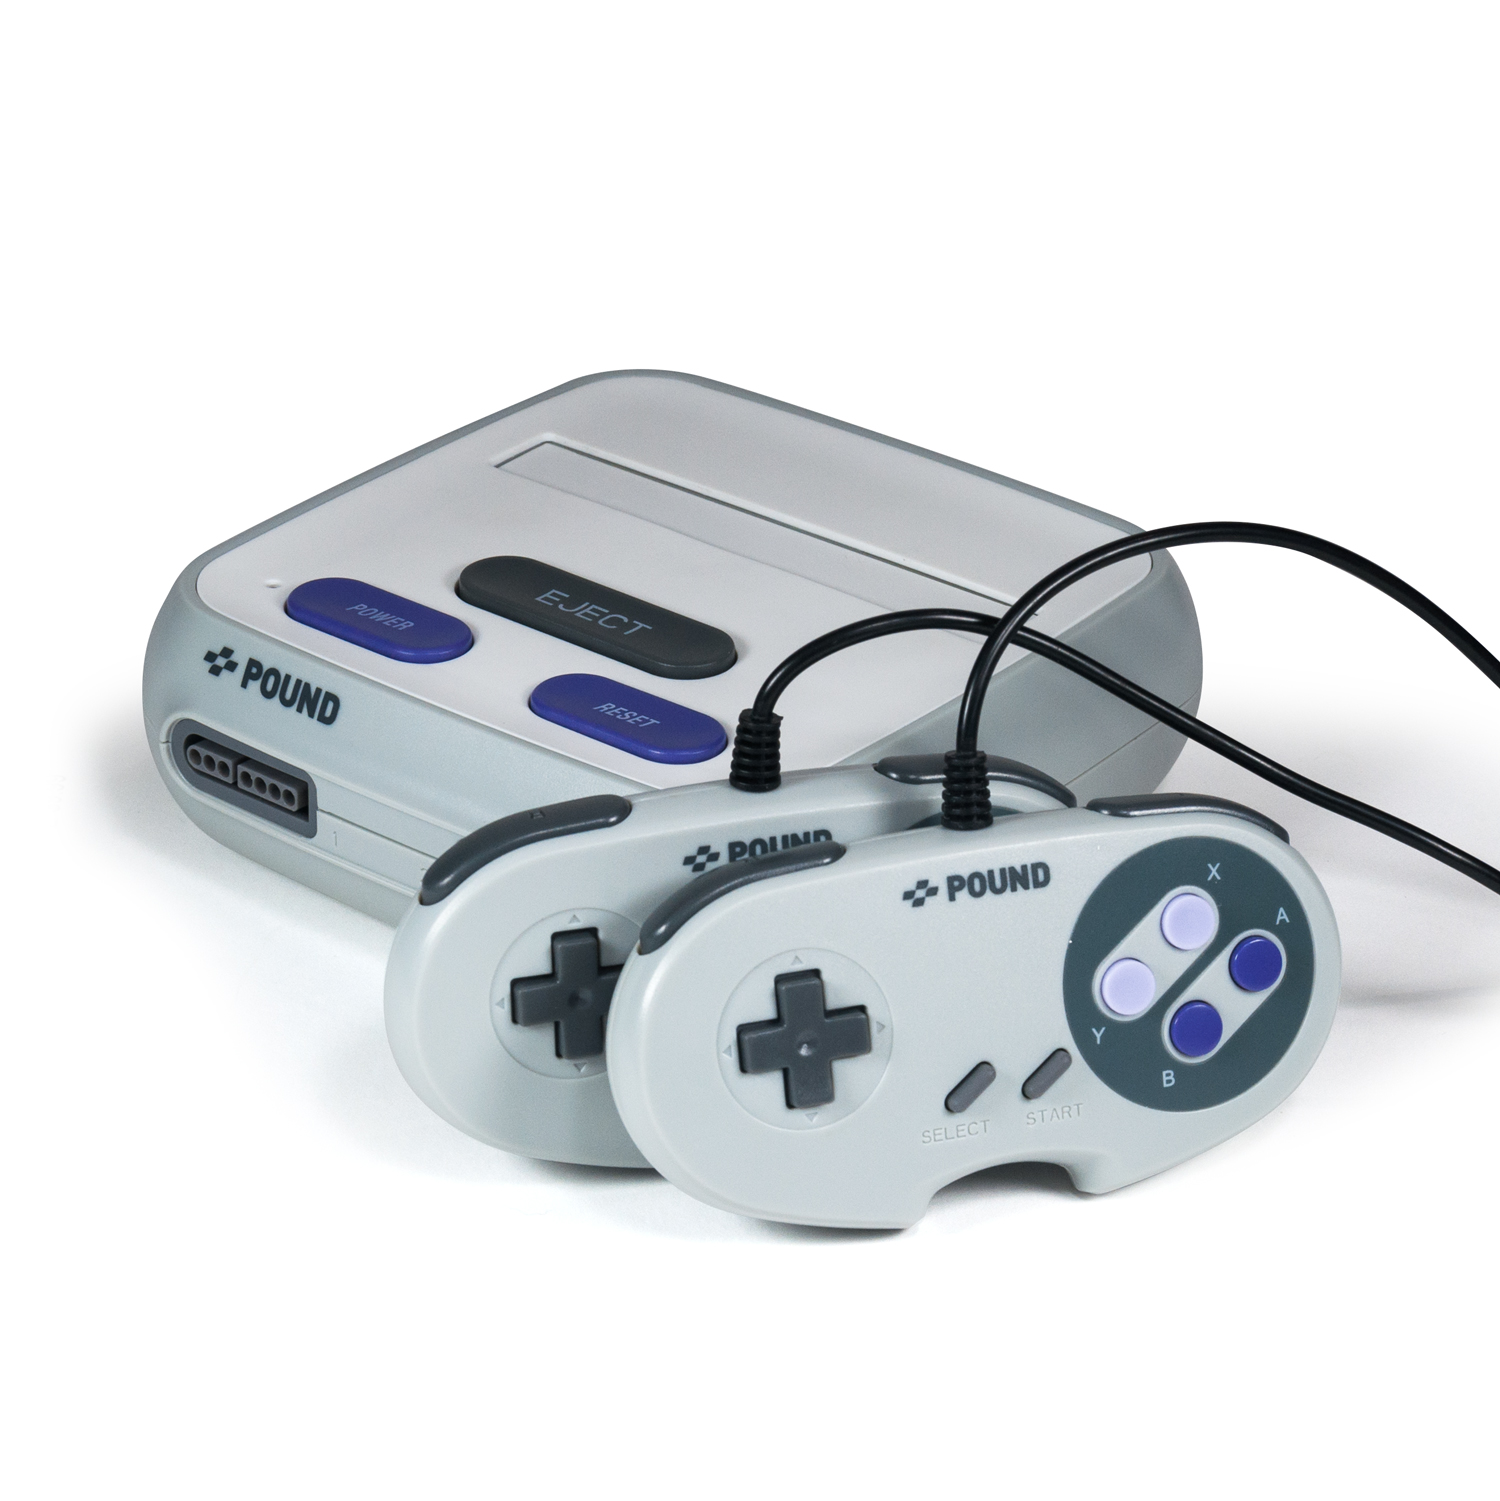 SNES Challenger Console by Pound Technology